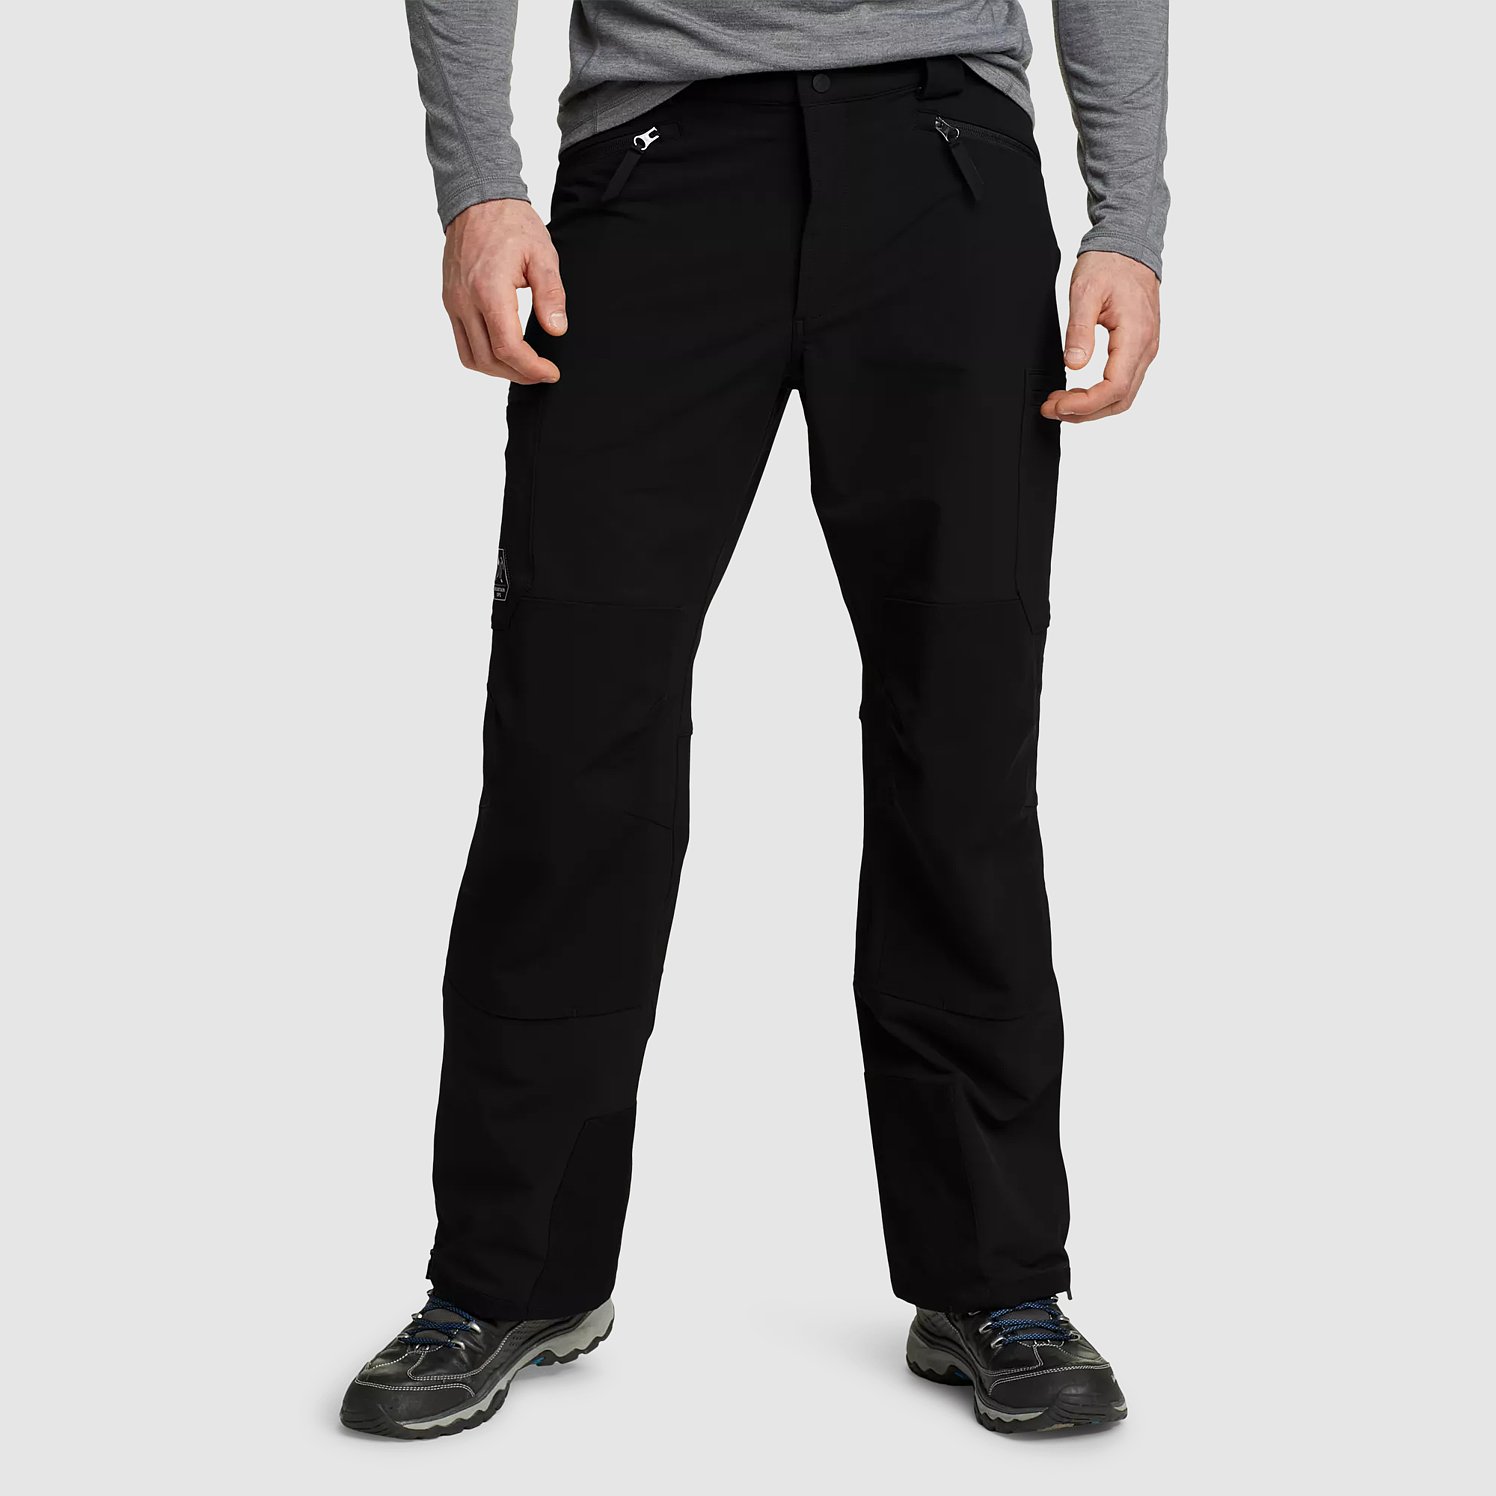 Eddie Bauer Men's Guide Pro Convertible Pants – Search By Inseam